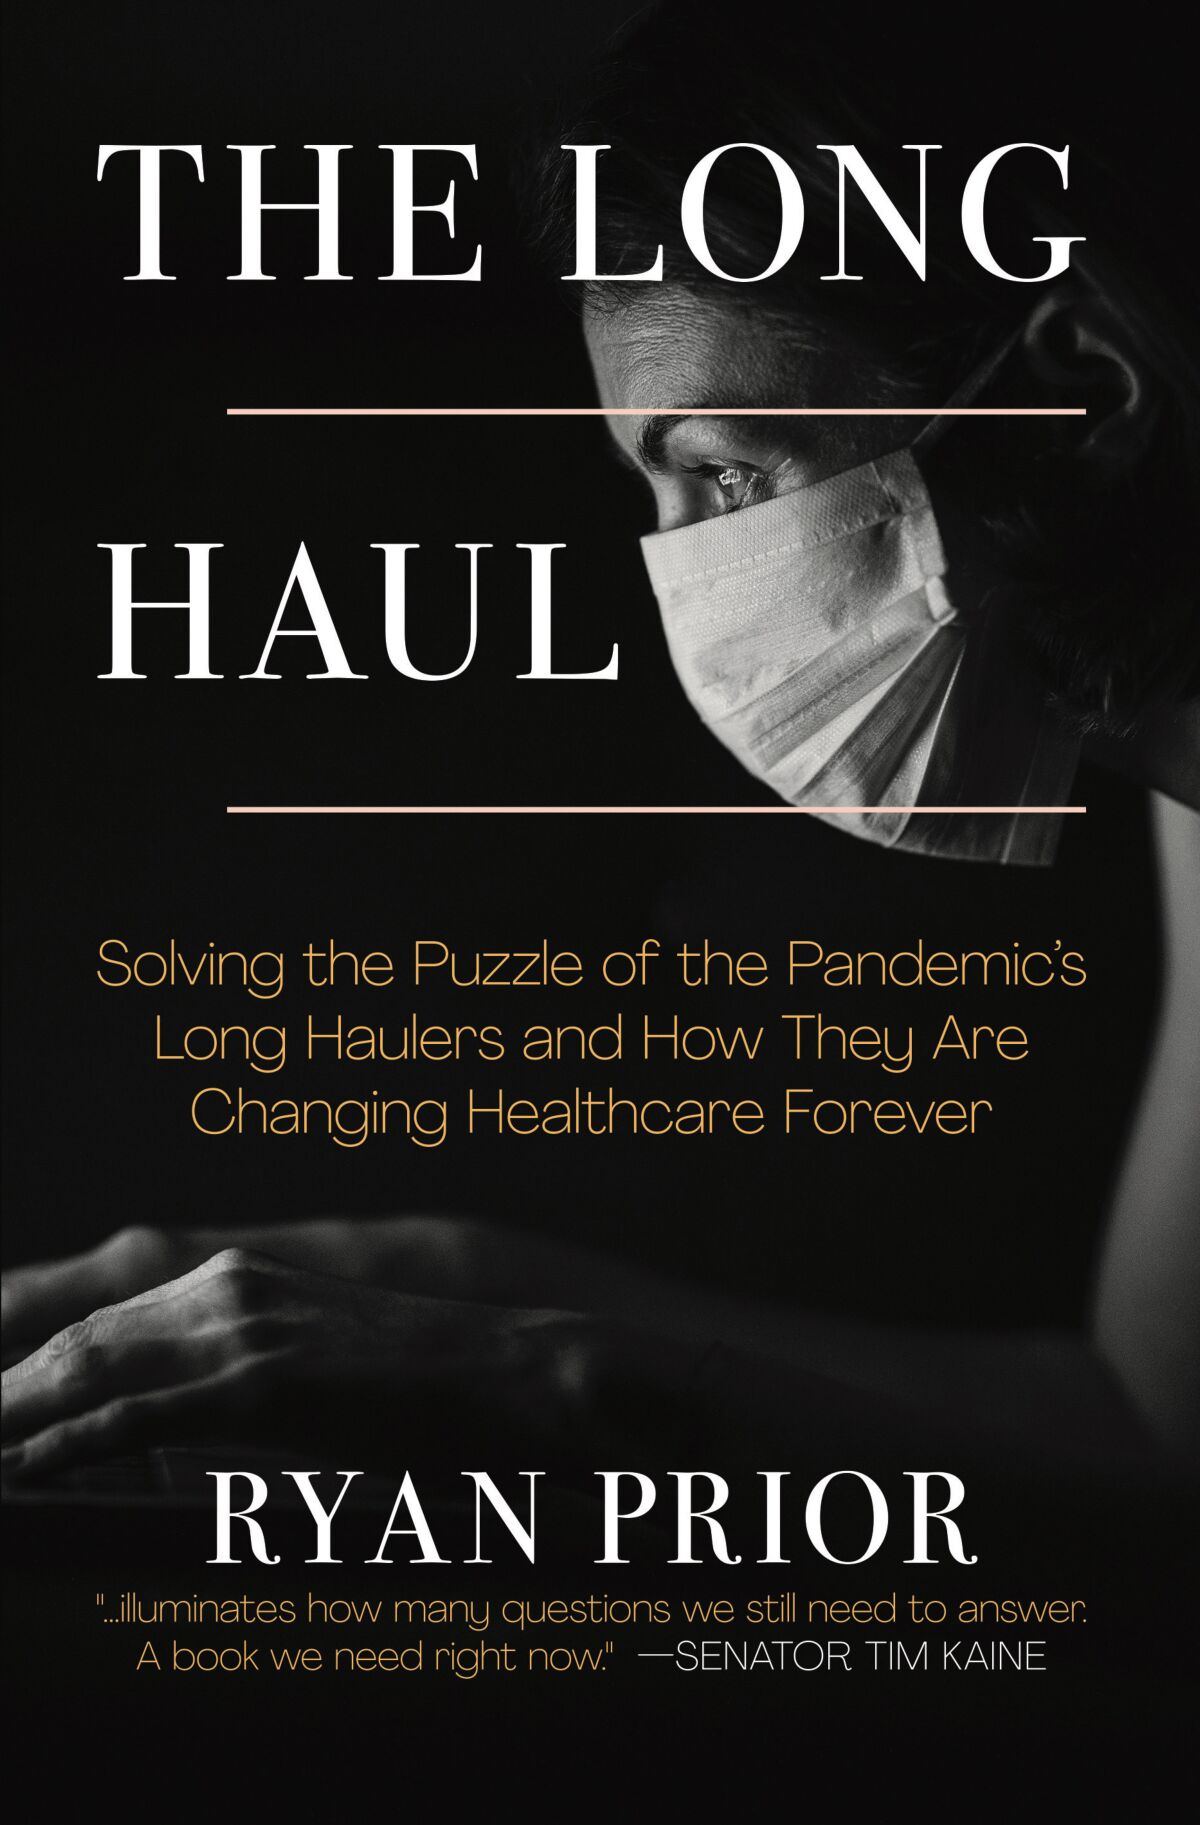 The cover of "The Long Haul," picturing a person waring a mask. 